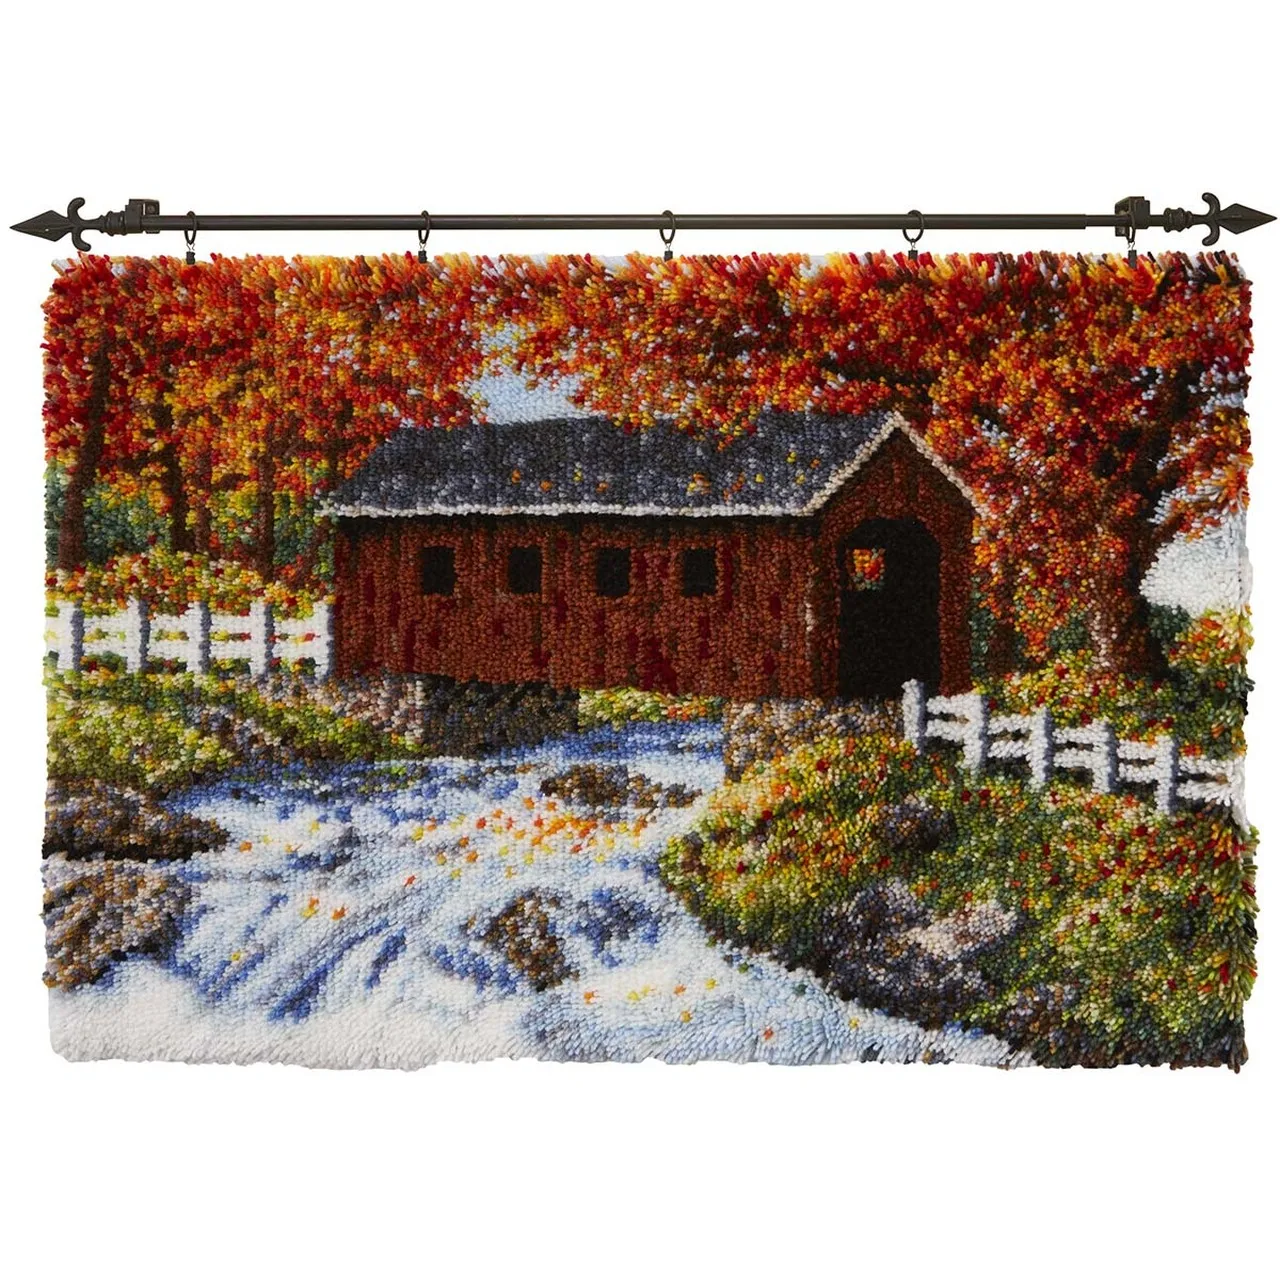 

Latch Hook Kits Autumn Covered Bridge Wall Hanging DIY Carpet Rug Pre-Printed Canvas with Non-Skid Backing Floor Mat 102x69cm